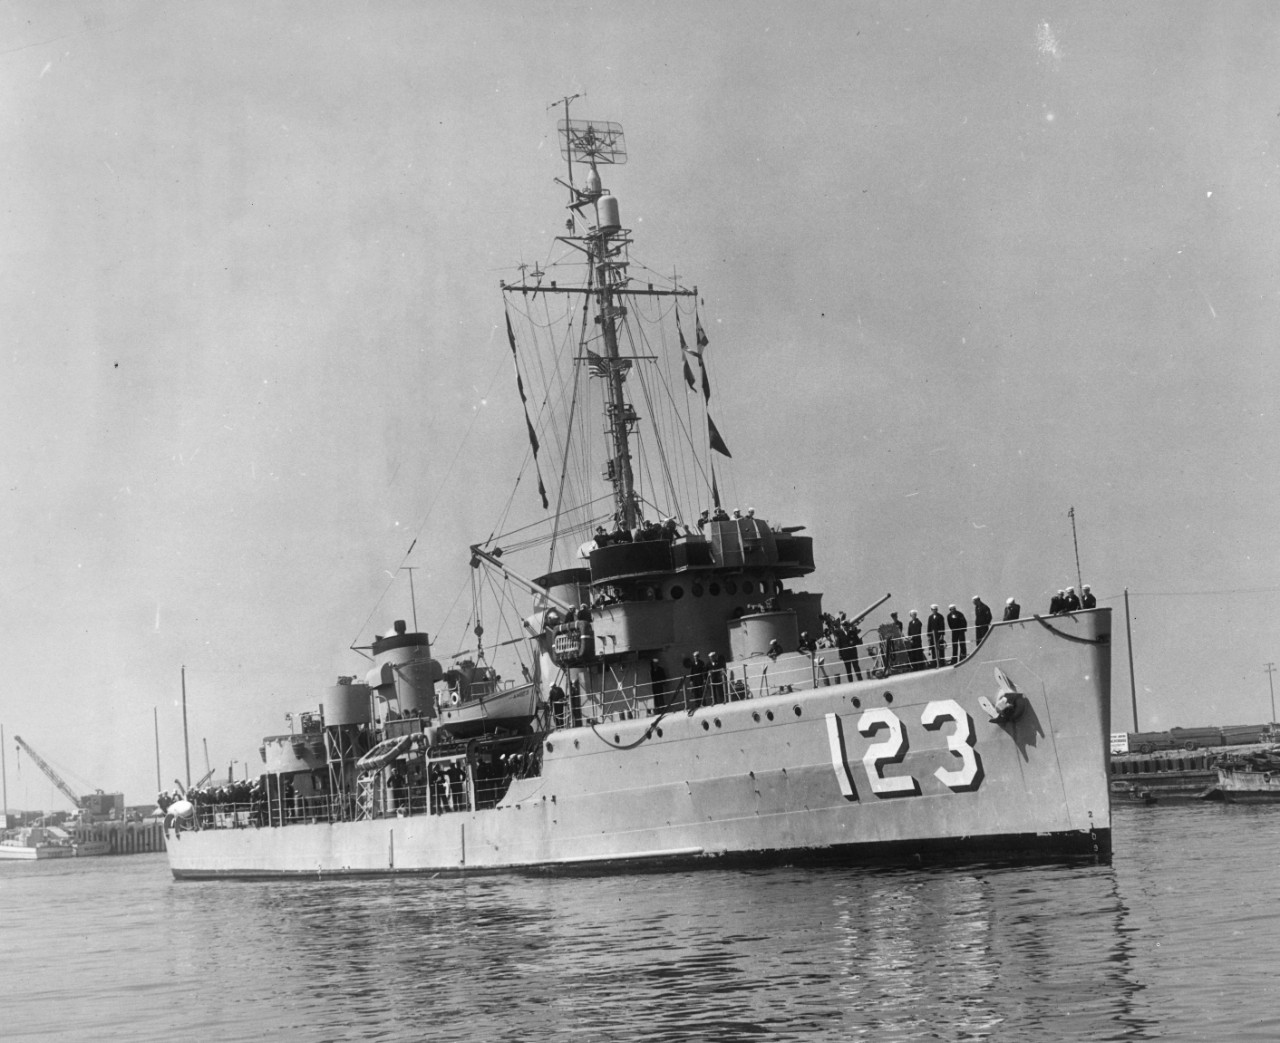 Minesweeper USS Symbol (AM-123) warping into her home port, Long Beach Naval Station, after sweeping mines off the North Korean coast for the past ten months.